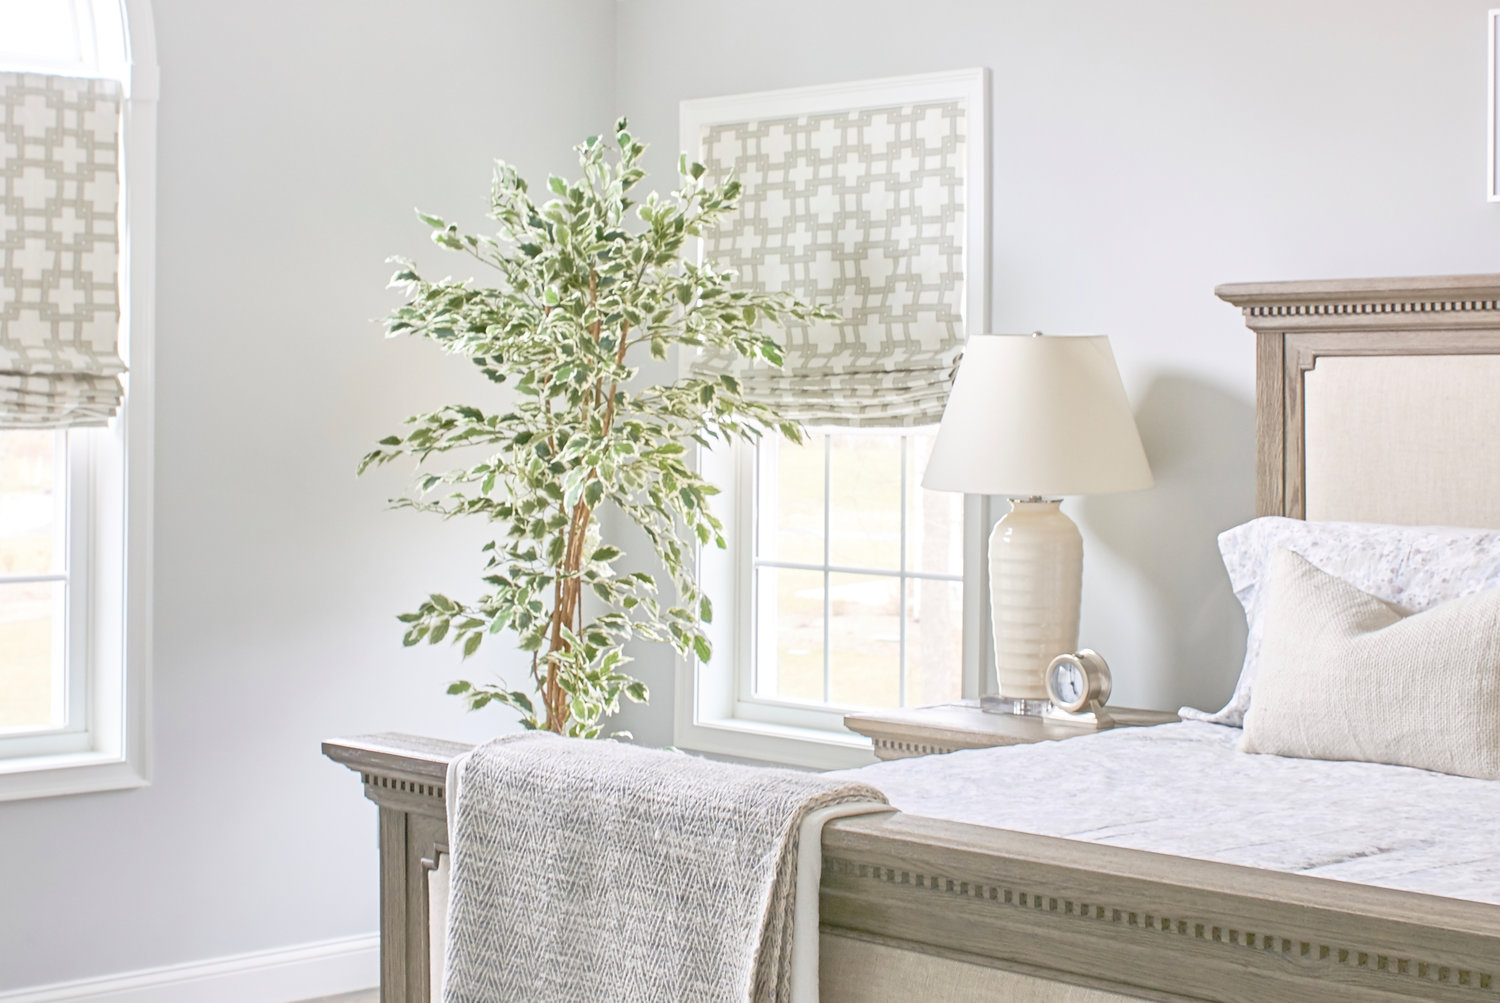 Linen shades with blue trim infuse the bright space with seaside 
appeal while connecting with other like-colored elements from furniture to textiles to artwork